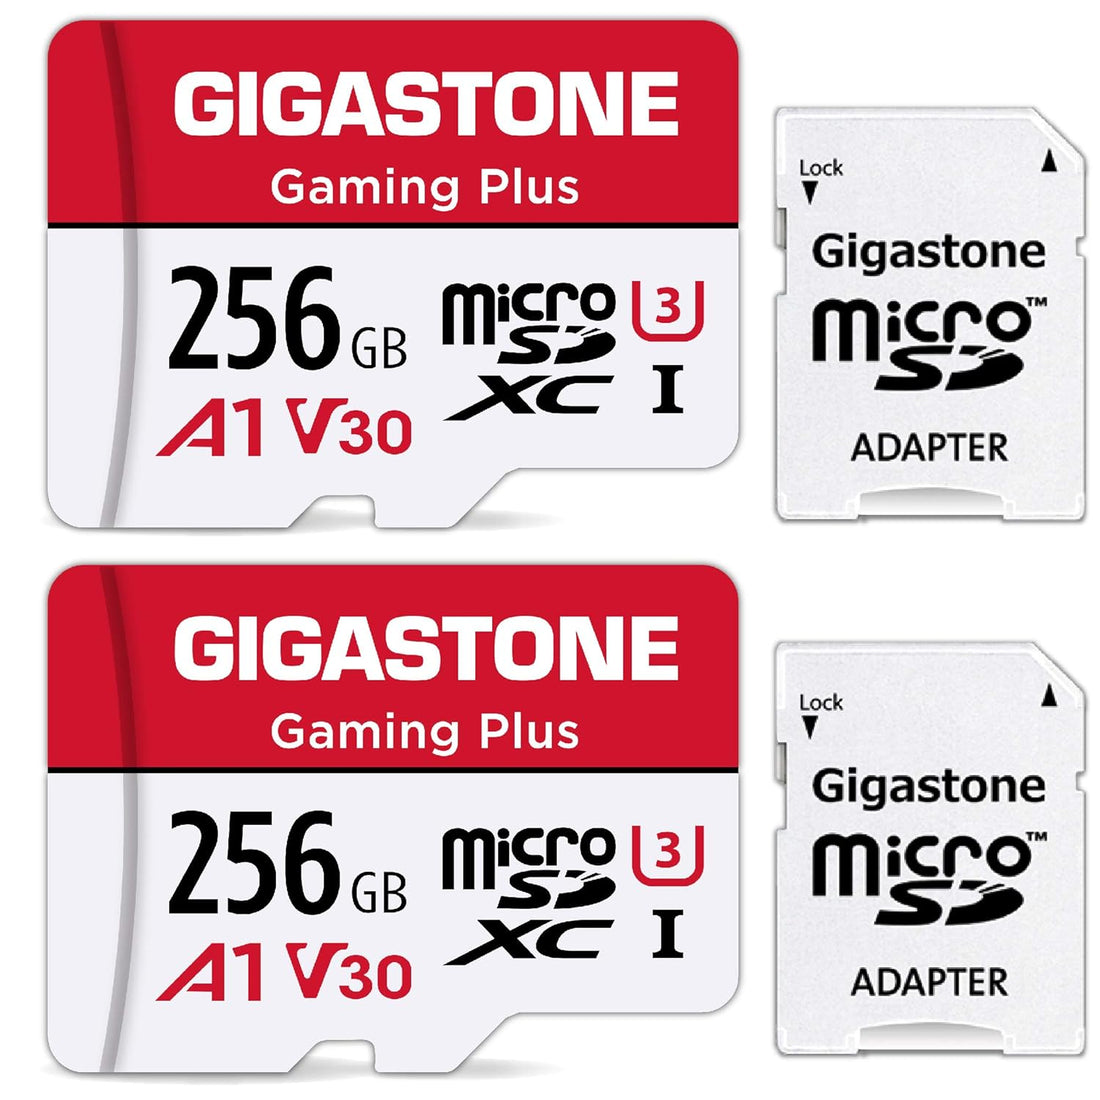 [Gigastone] 256GB Micro SD Card 2 Pack, Gaming Plus, MicroSDXC Card for Nintendo-Switch, Wyze, GoPro, Dash Cam, Security Cam, 4K Video Recording, UHS-I A1 U3 V30 C10, up to 100MB/s, with Adapter